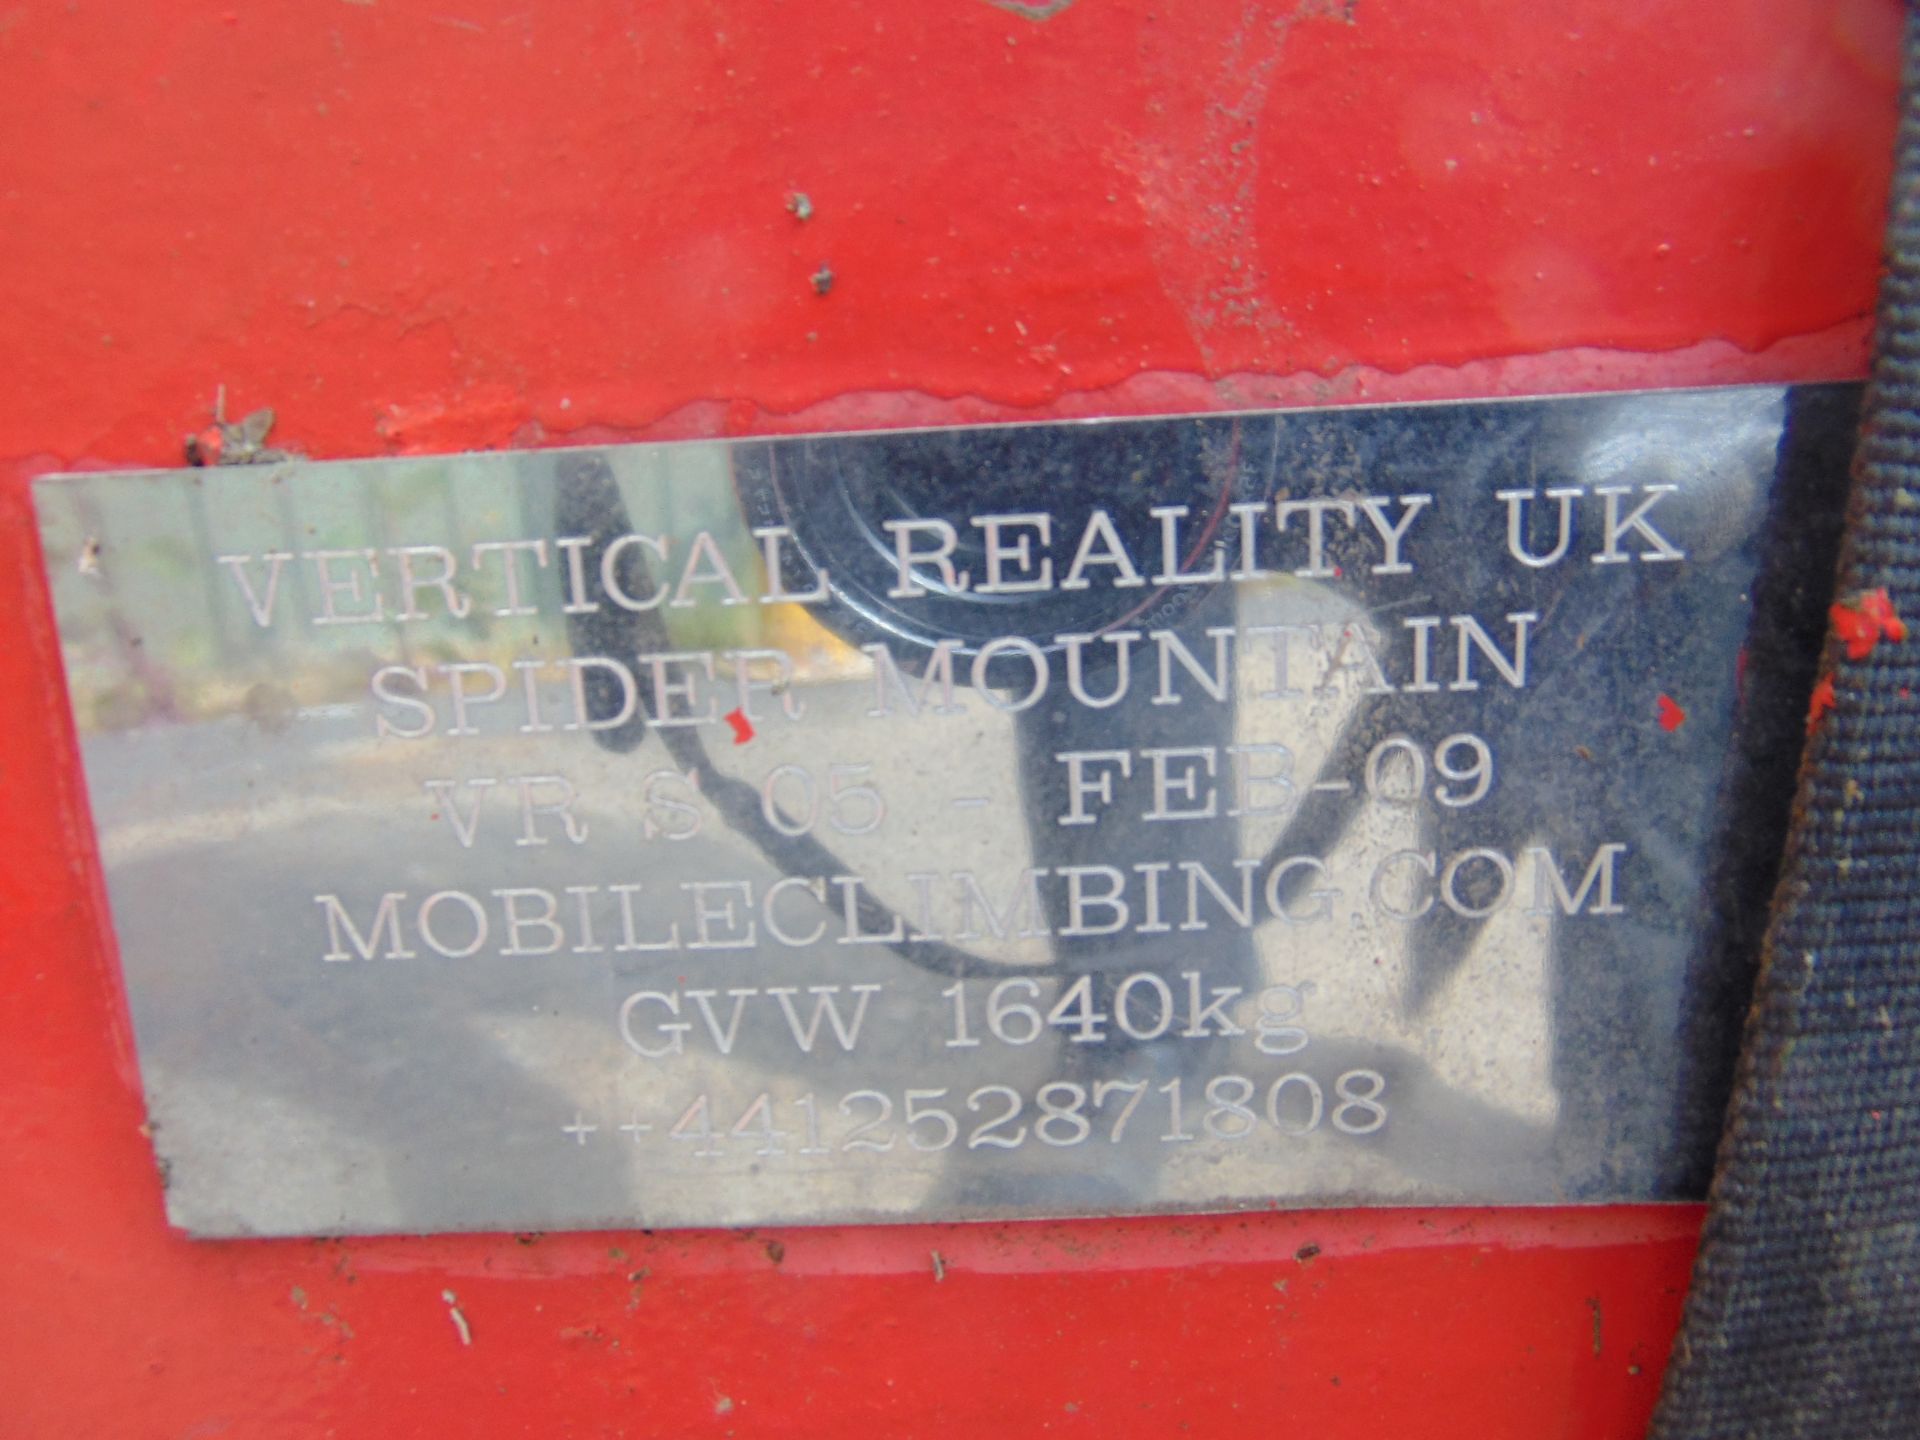 Vertical Reality Spider Mountain climbing system on mobile transport trailer - Image 46 of 47